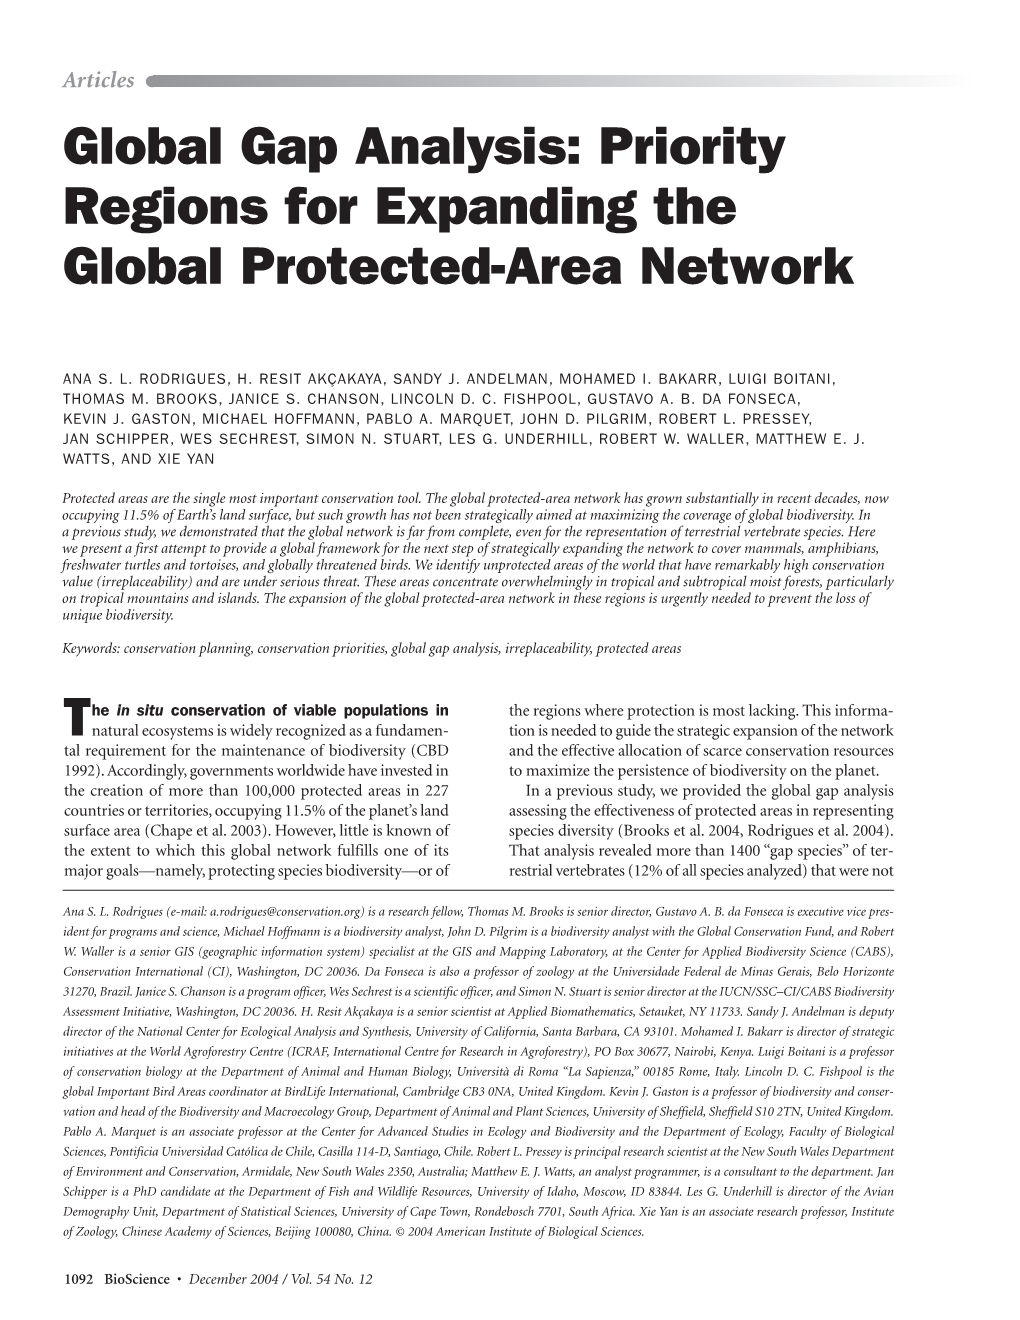 Priority Regions for Expanding the Global Protected-Area Network